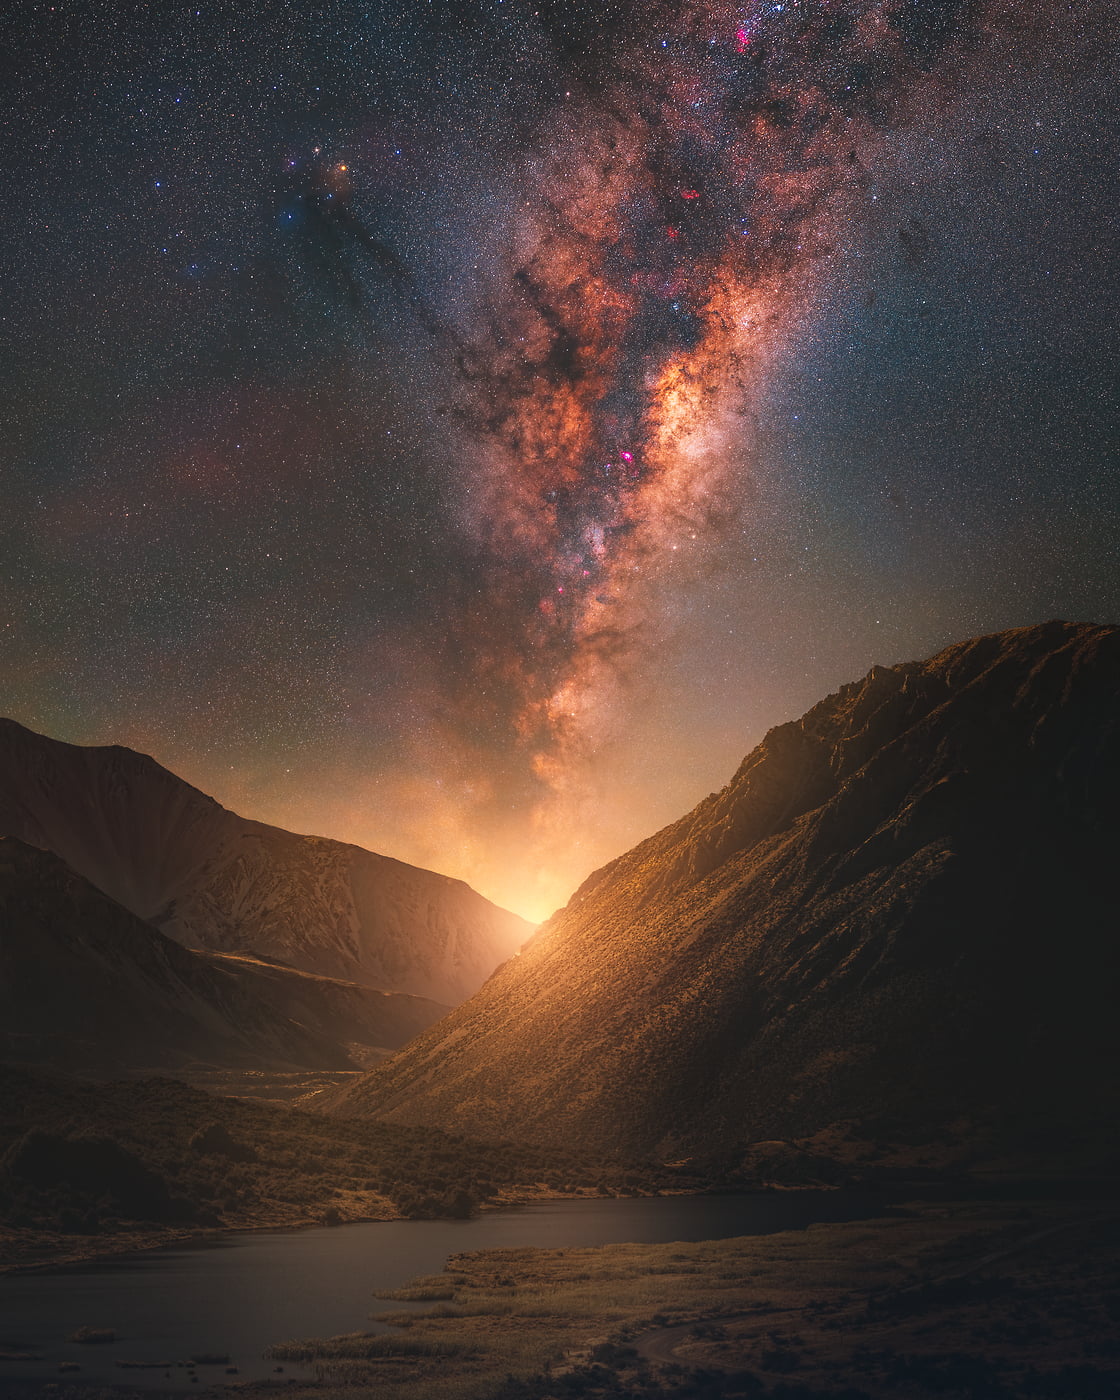 332 megapixels! A very high resolution, large-format VAST photo print of a New Zealand landscape at nighttime with the Milky Way and stars in the night sky; fine art astrophotography photo created by Paul Wilson.